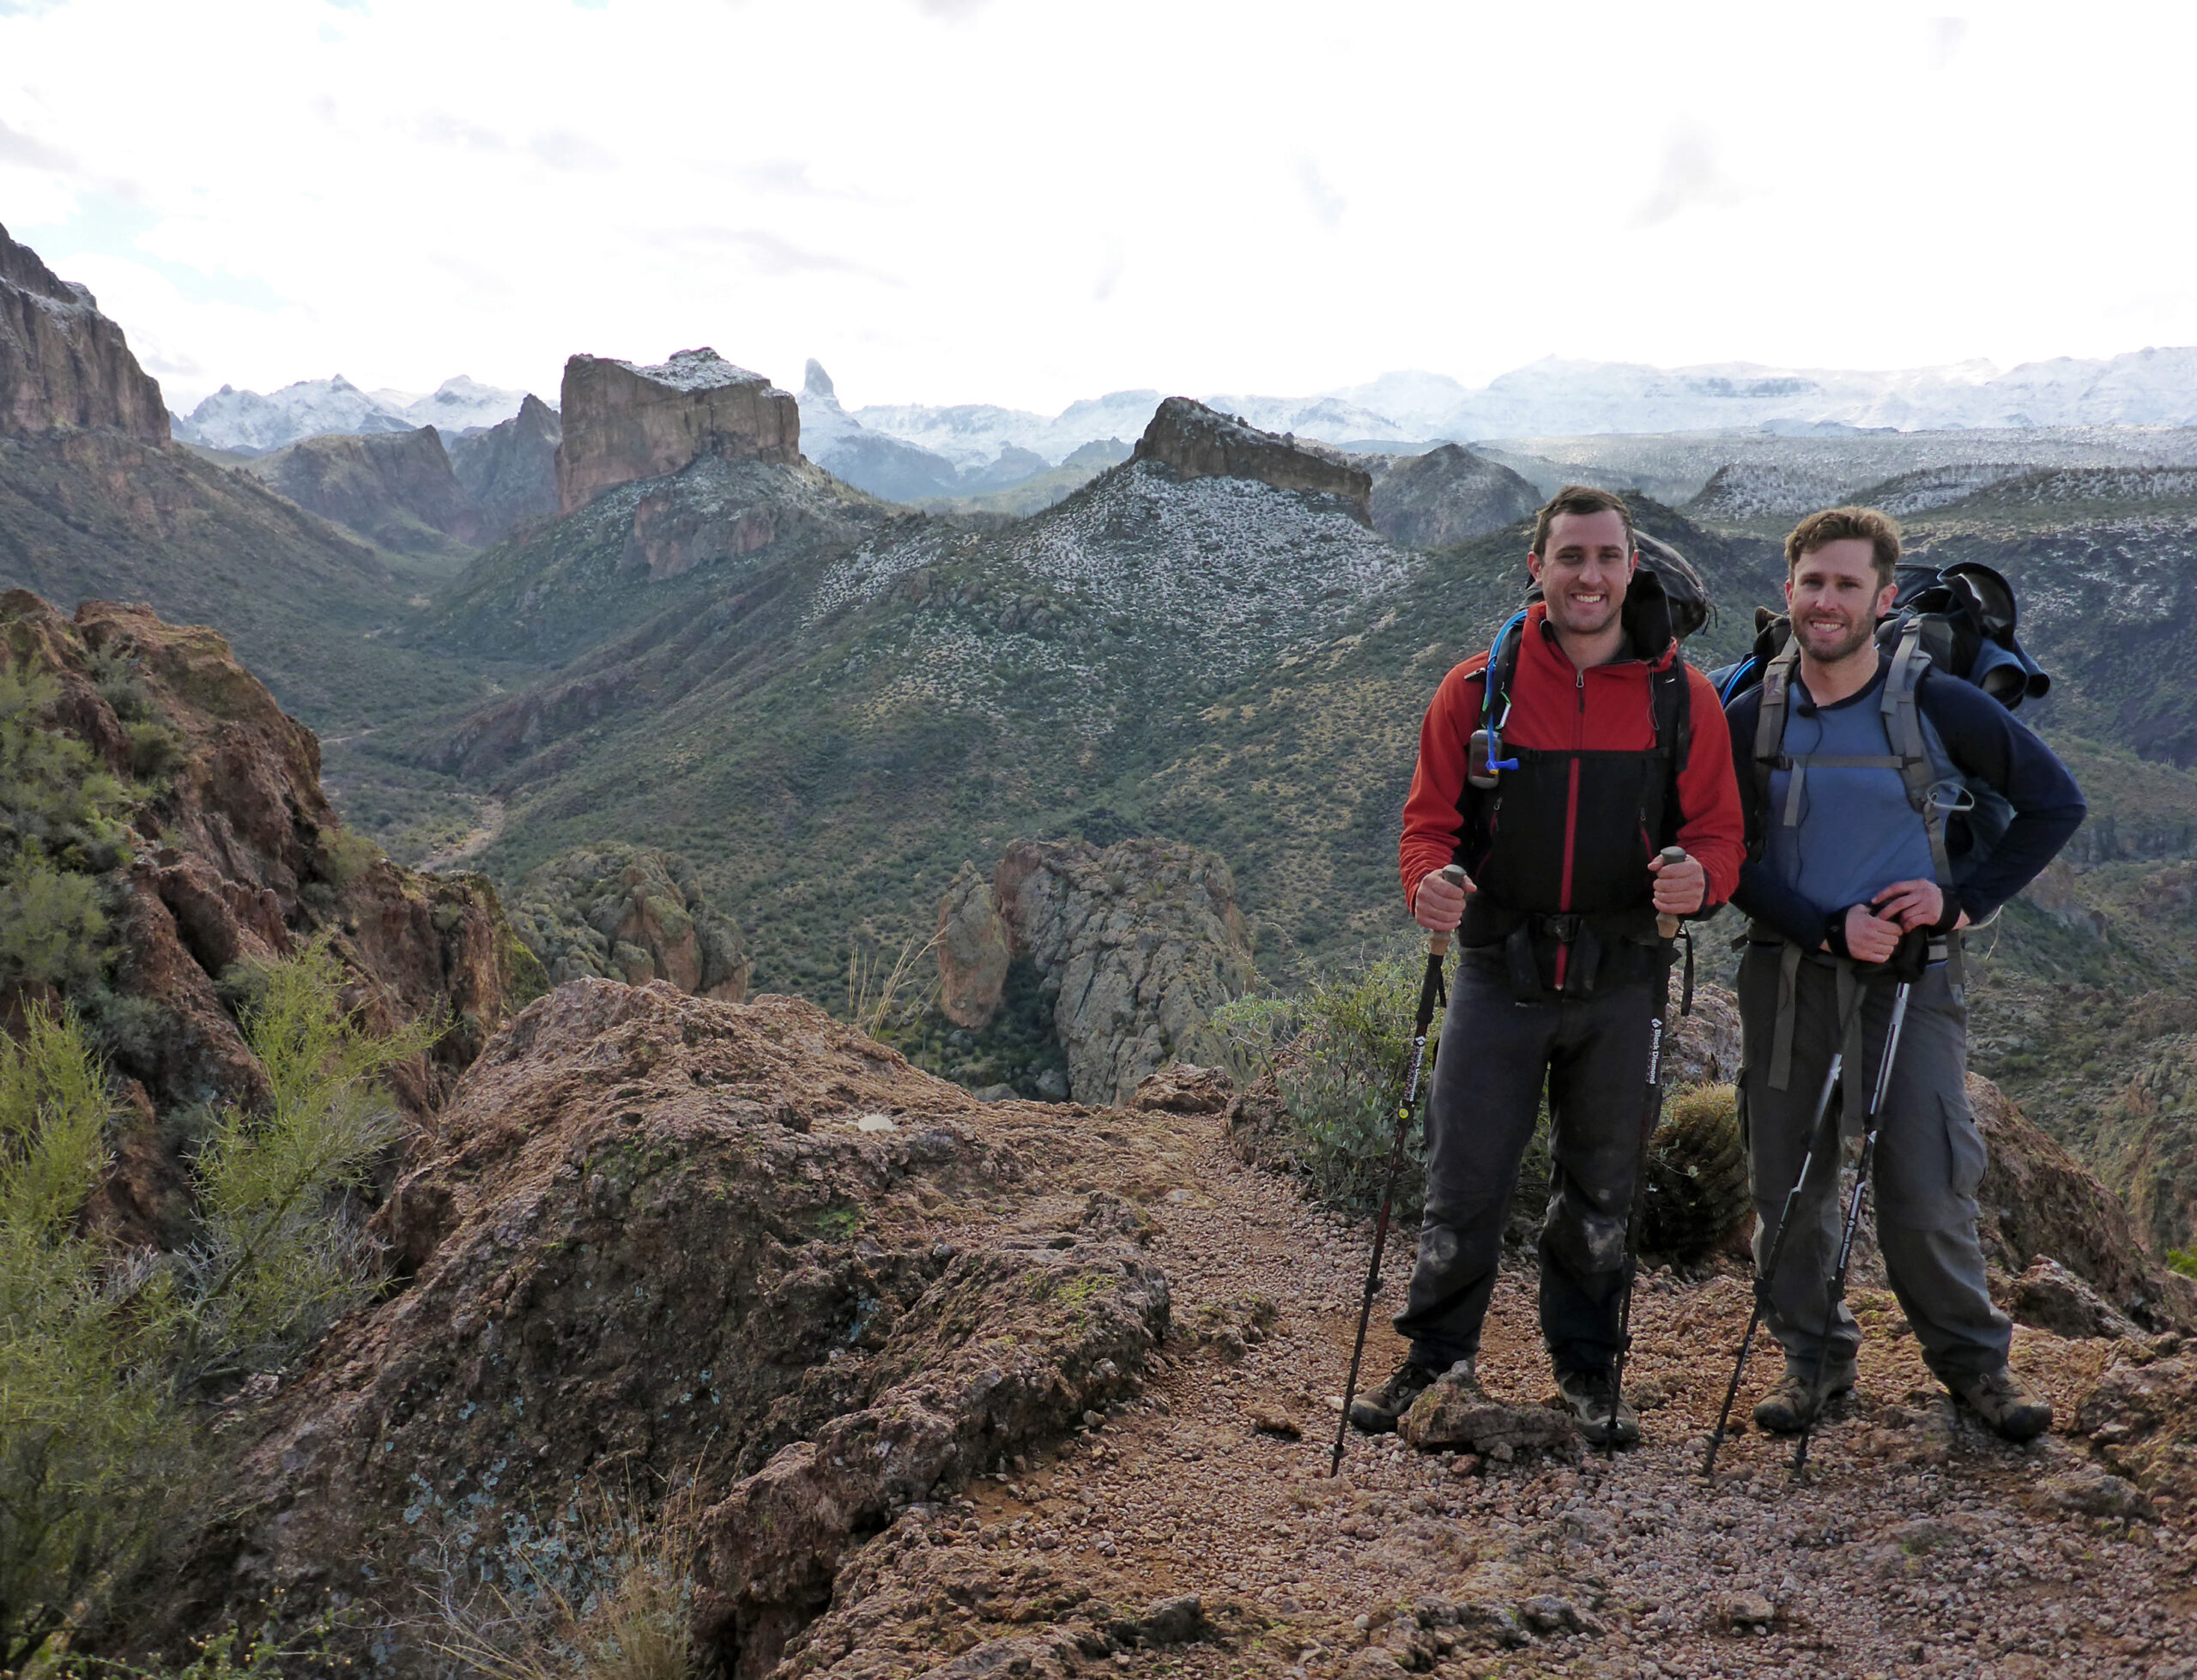 Hank and Brian stand in Arizona's Superstition Mountains on the Boulder Canyon Trail.